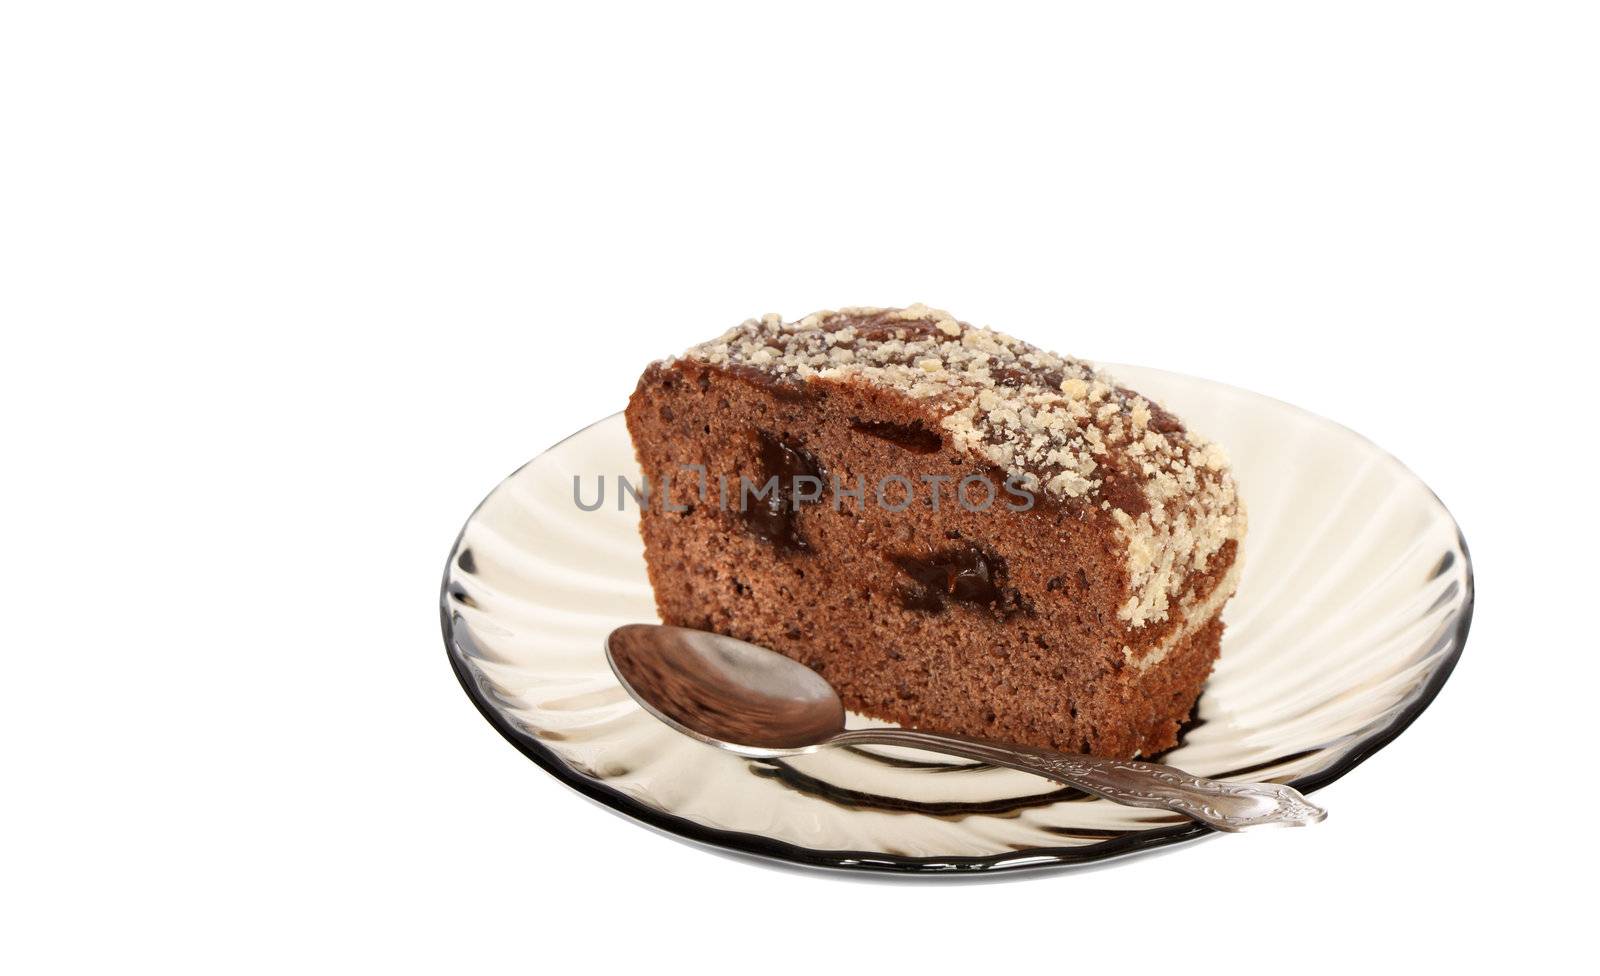 Piece of chokolate fancy cake on glass spoon. Isolated on white with clipping path